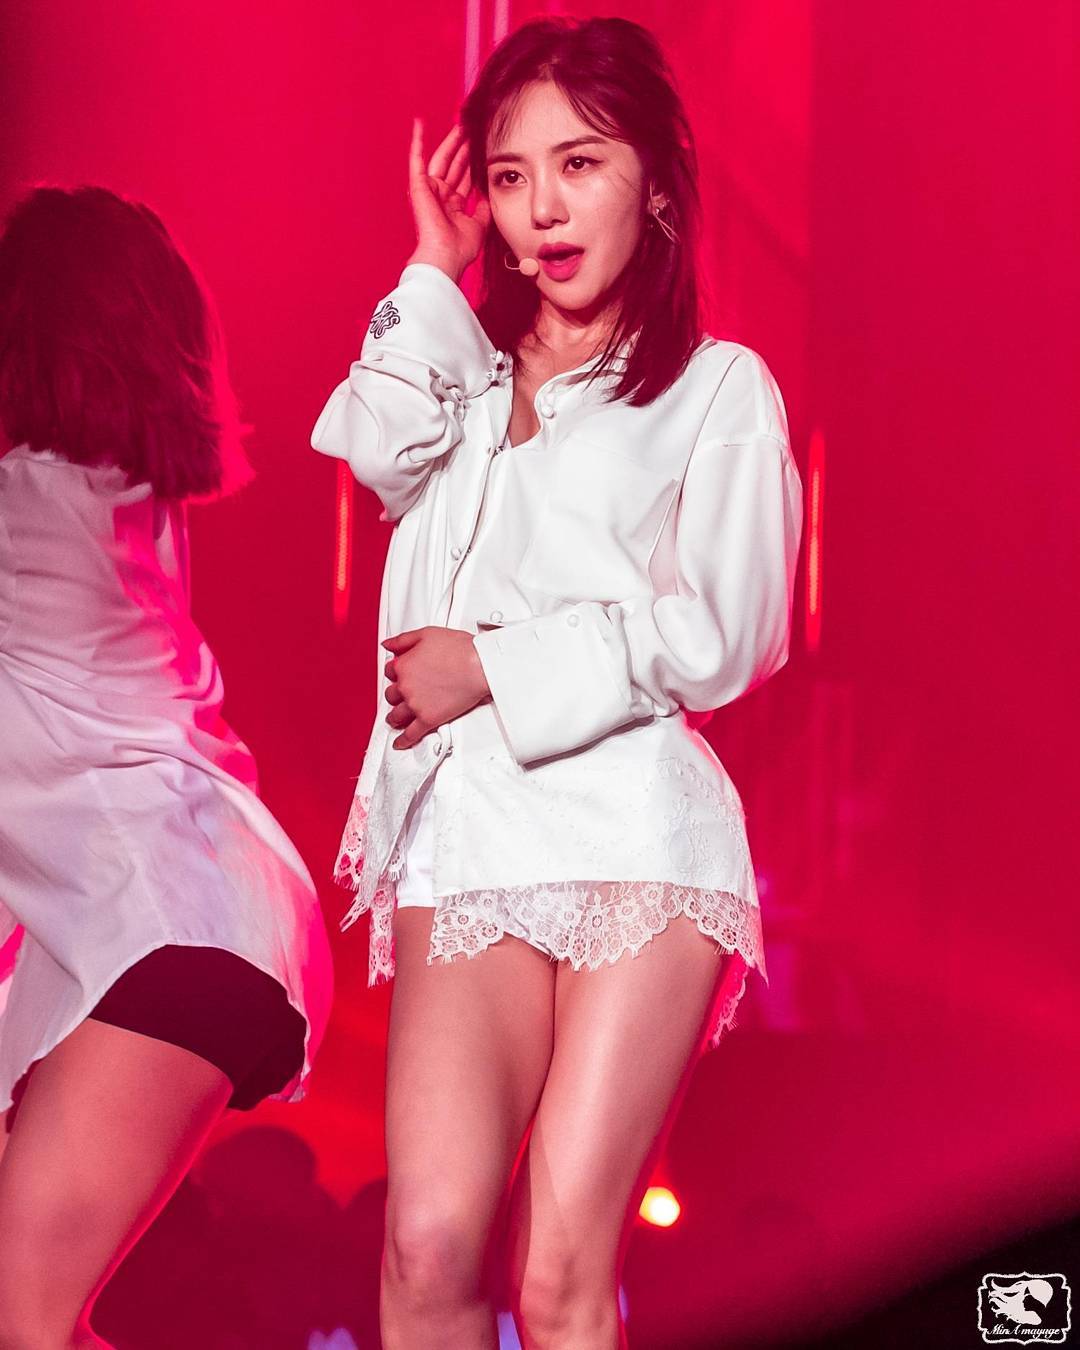 The color of the lighting enhanced Mina’s sexiness on stage! 